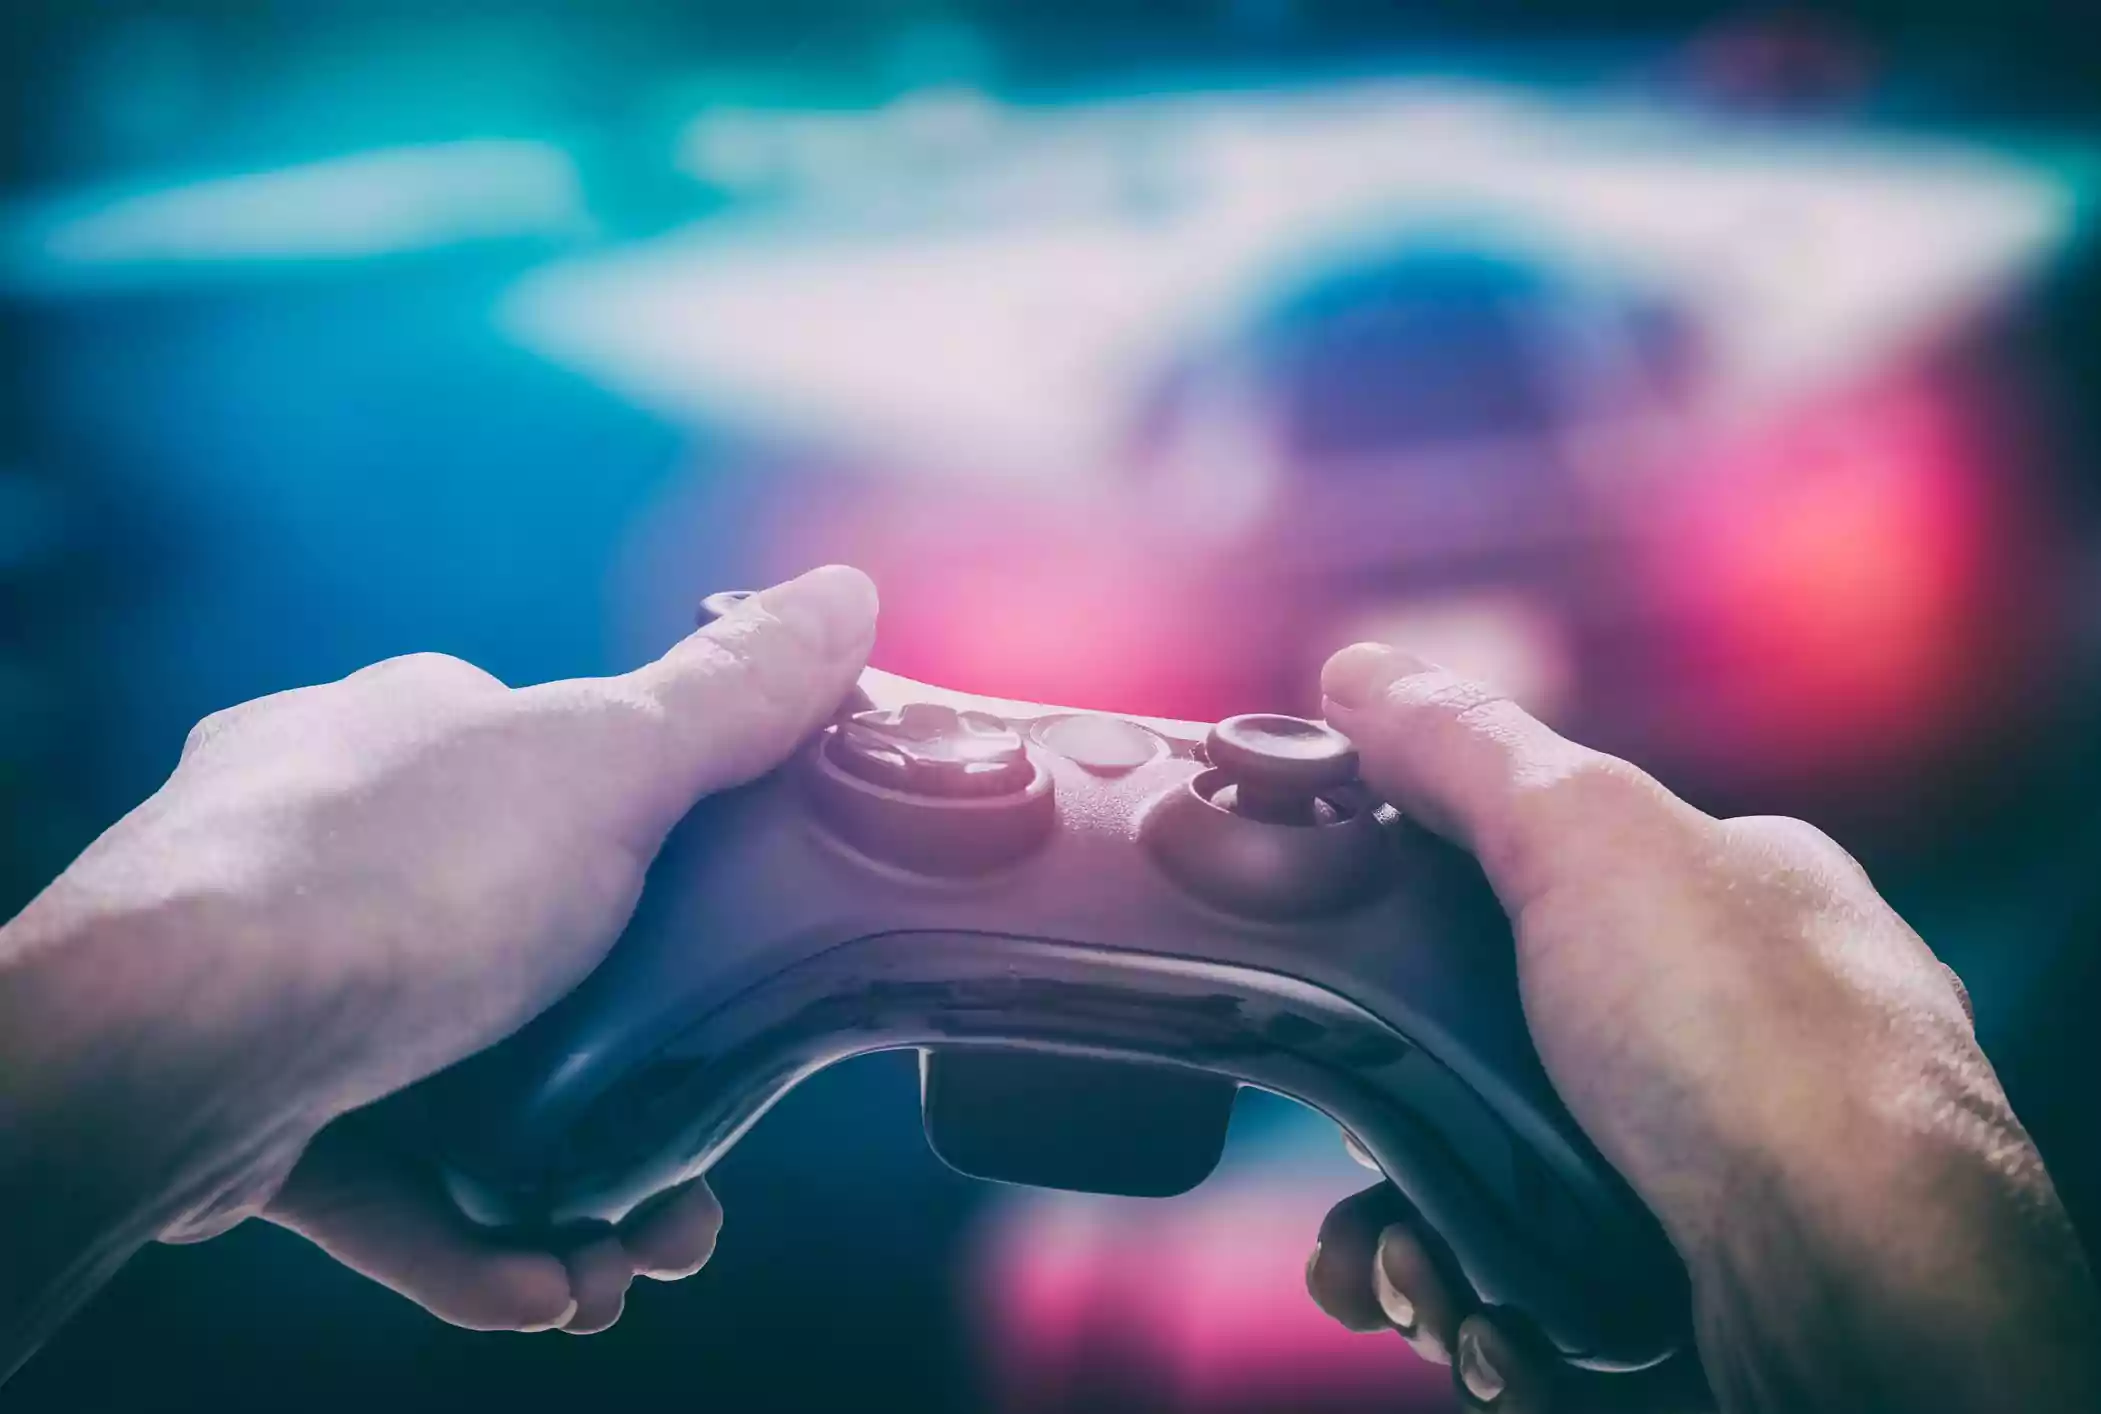 Video Games Are Social Spaces: Why Video Games Can Create Strong Social Connections.